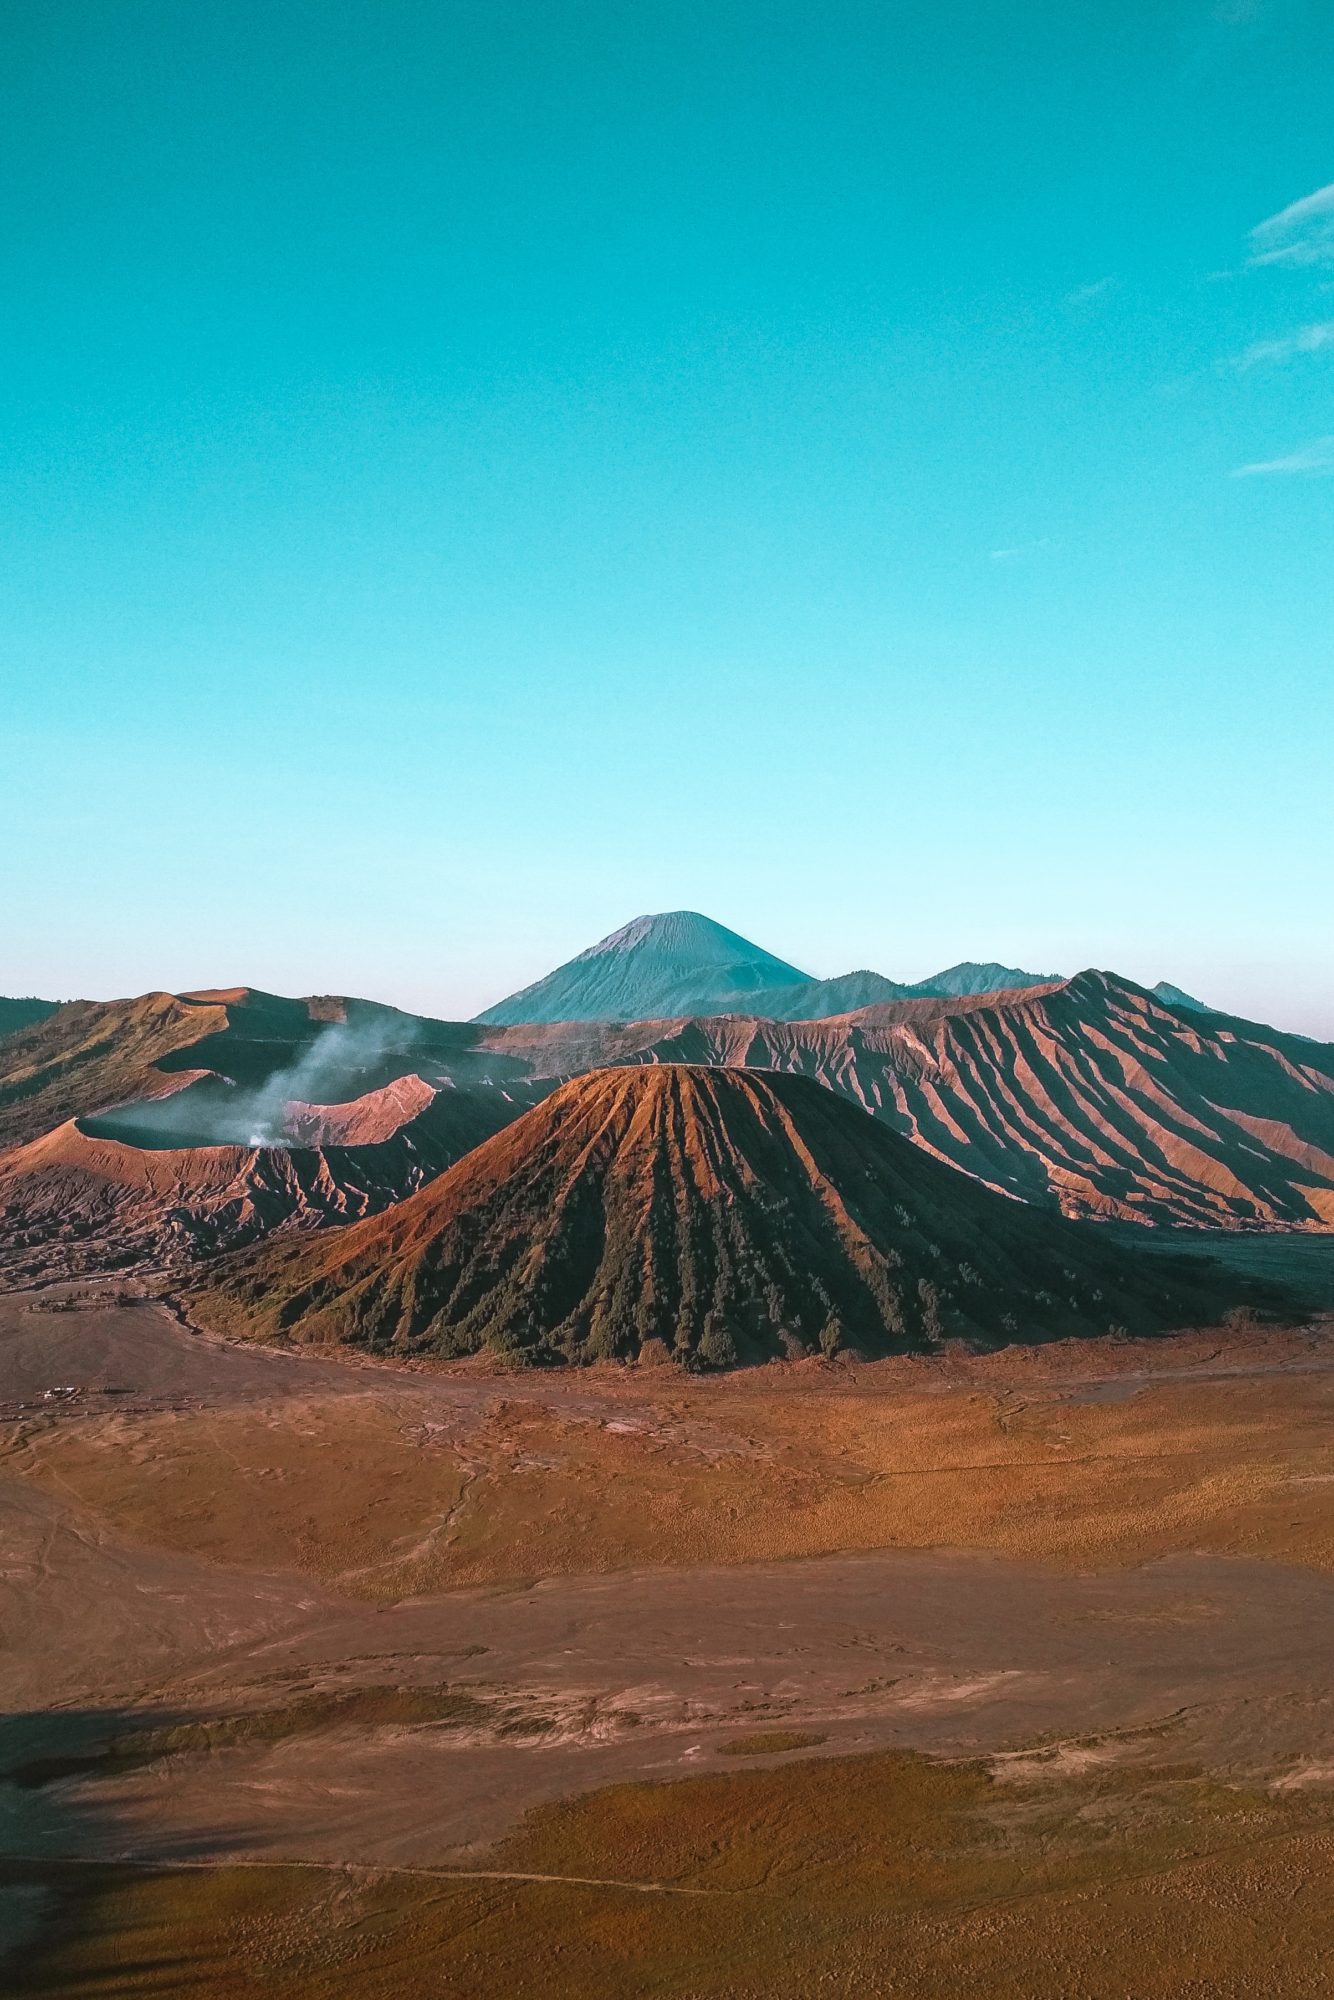 The Greater Bromo, Indonesia